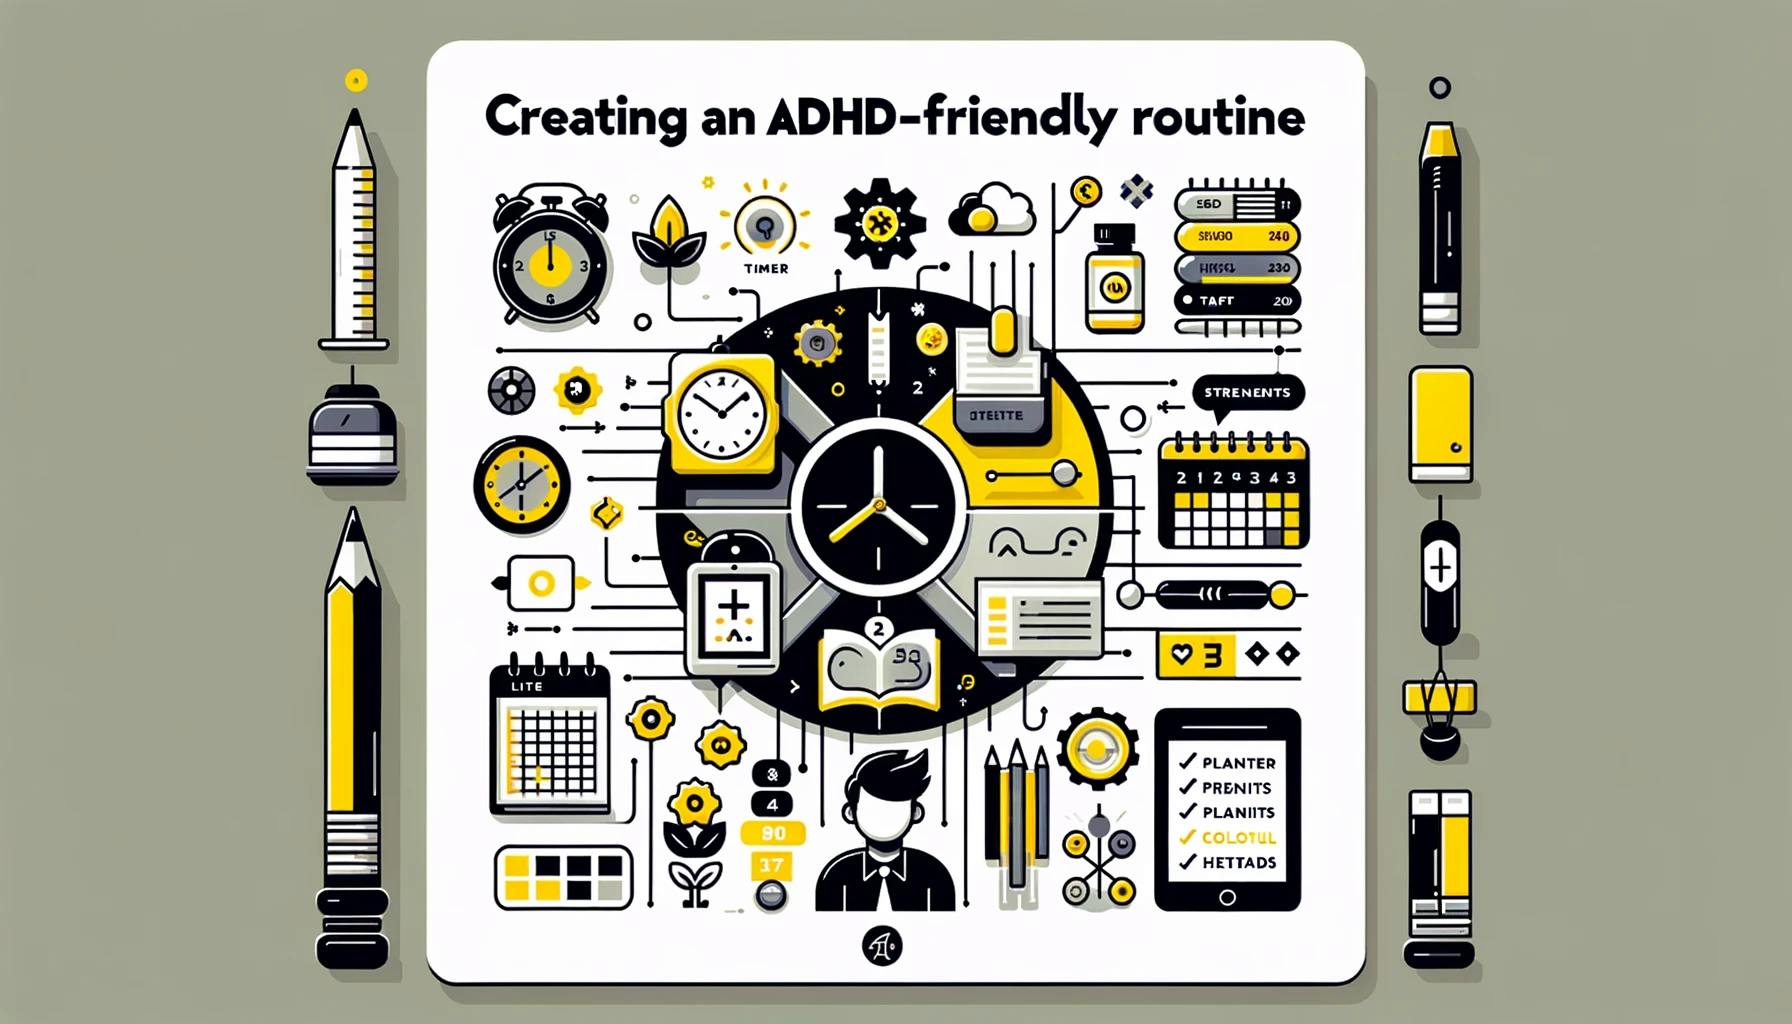 Navigating Life with ADHD: Tips for Creating an ADHD-Friendly Routine